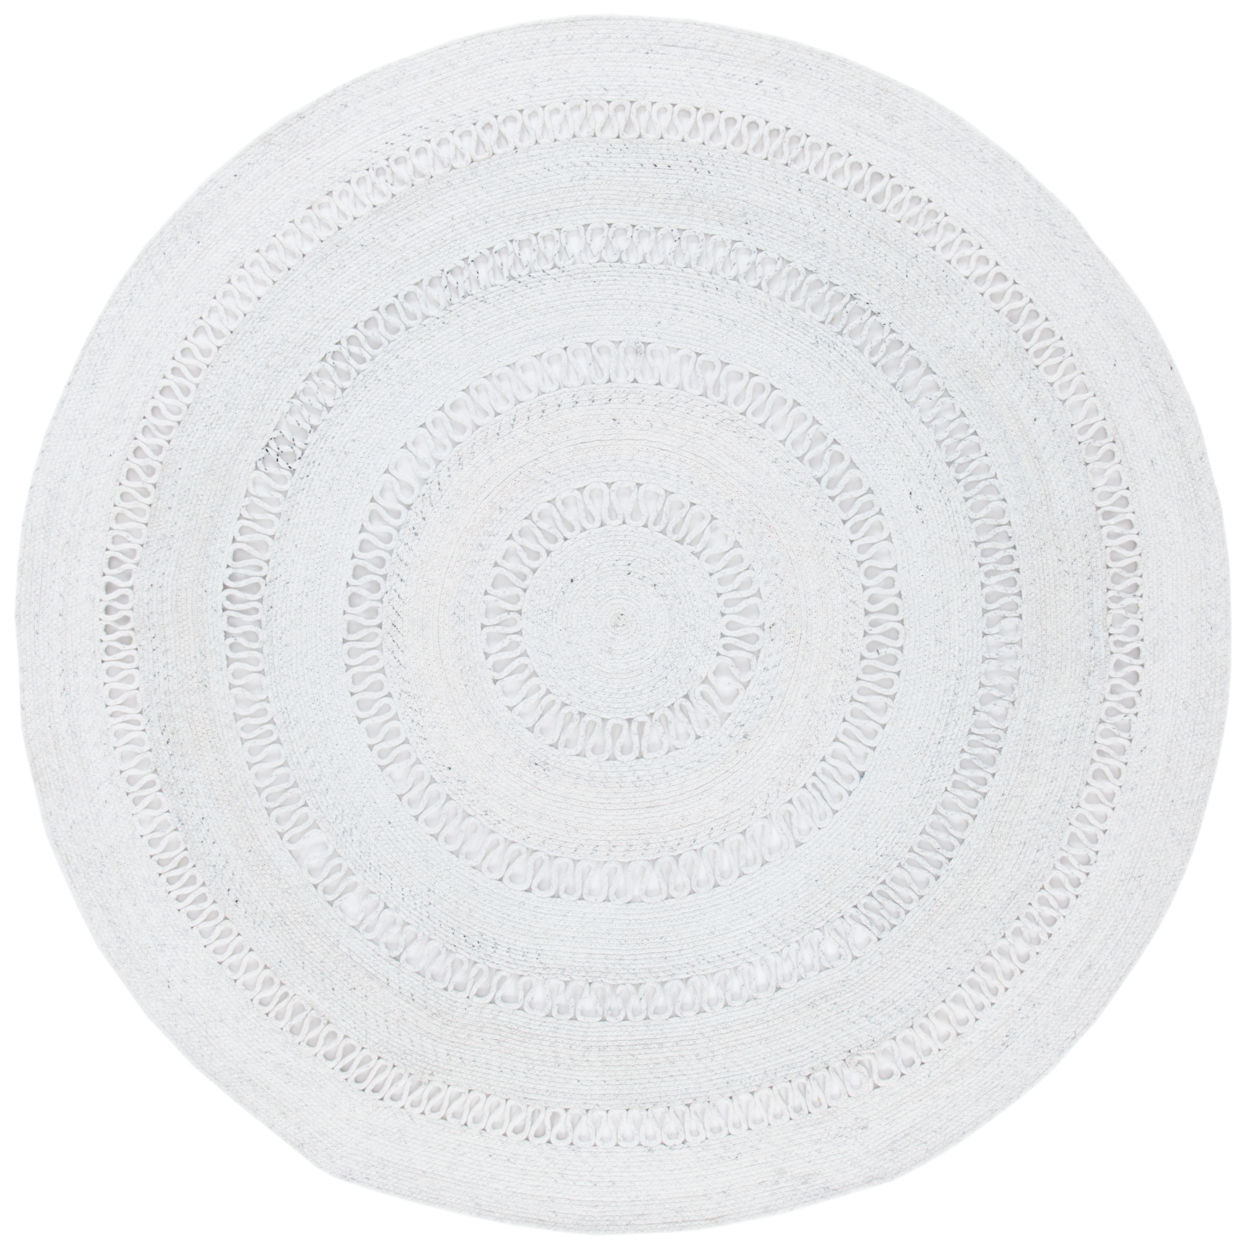 SAFAVIEH Cape Cod Collection CAP221A Handwoven Ivory Rug - 7' Round